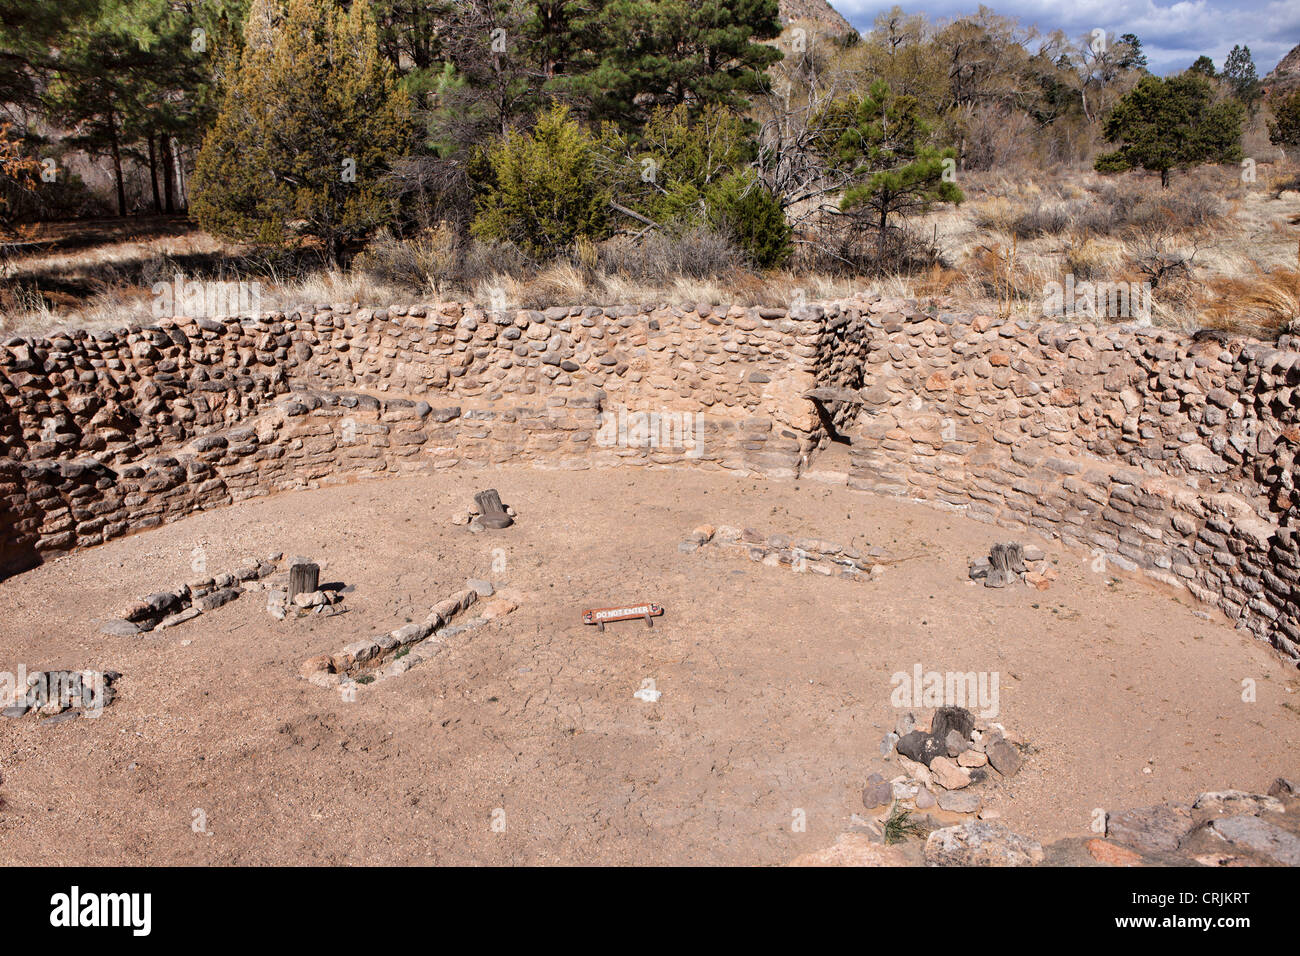 Historic Pueblo dwelling in Bandelier National Monument, New Mexico Stock Photo